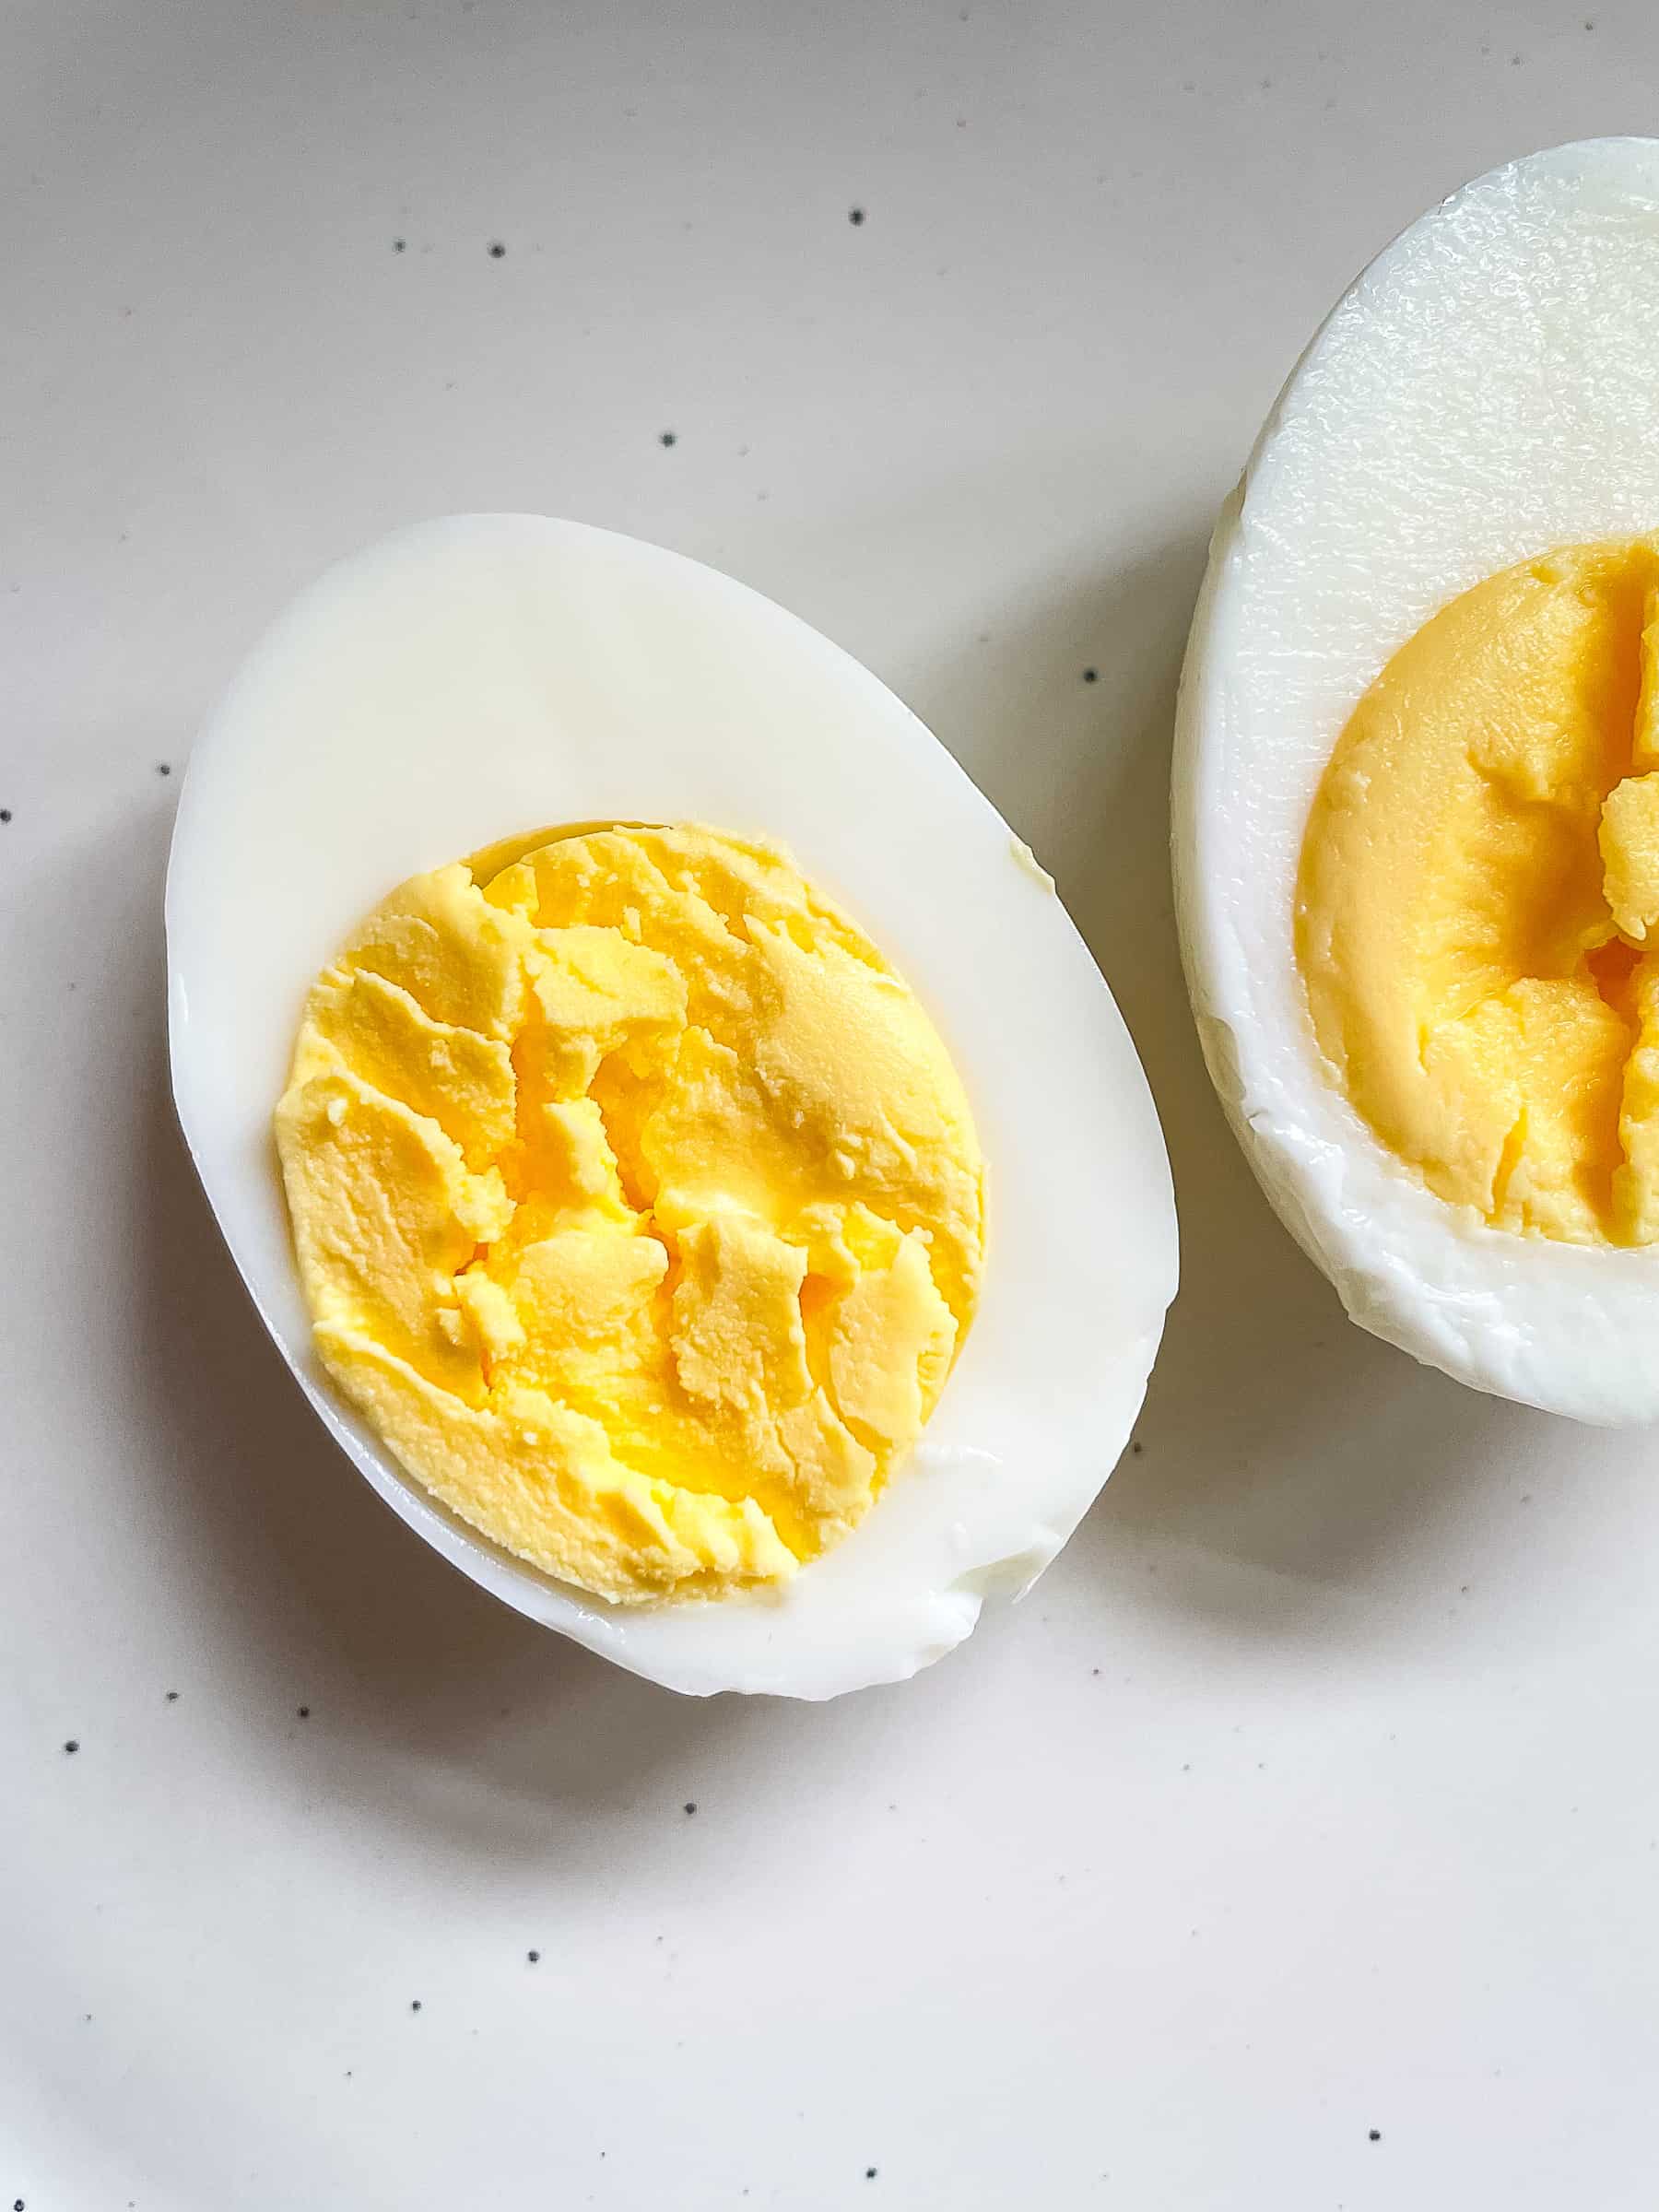 One hard boiled egg cut in half on a plate.